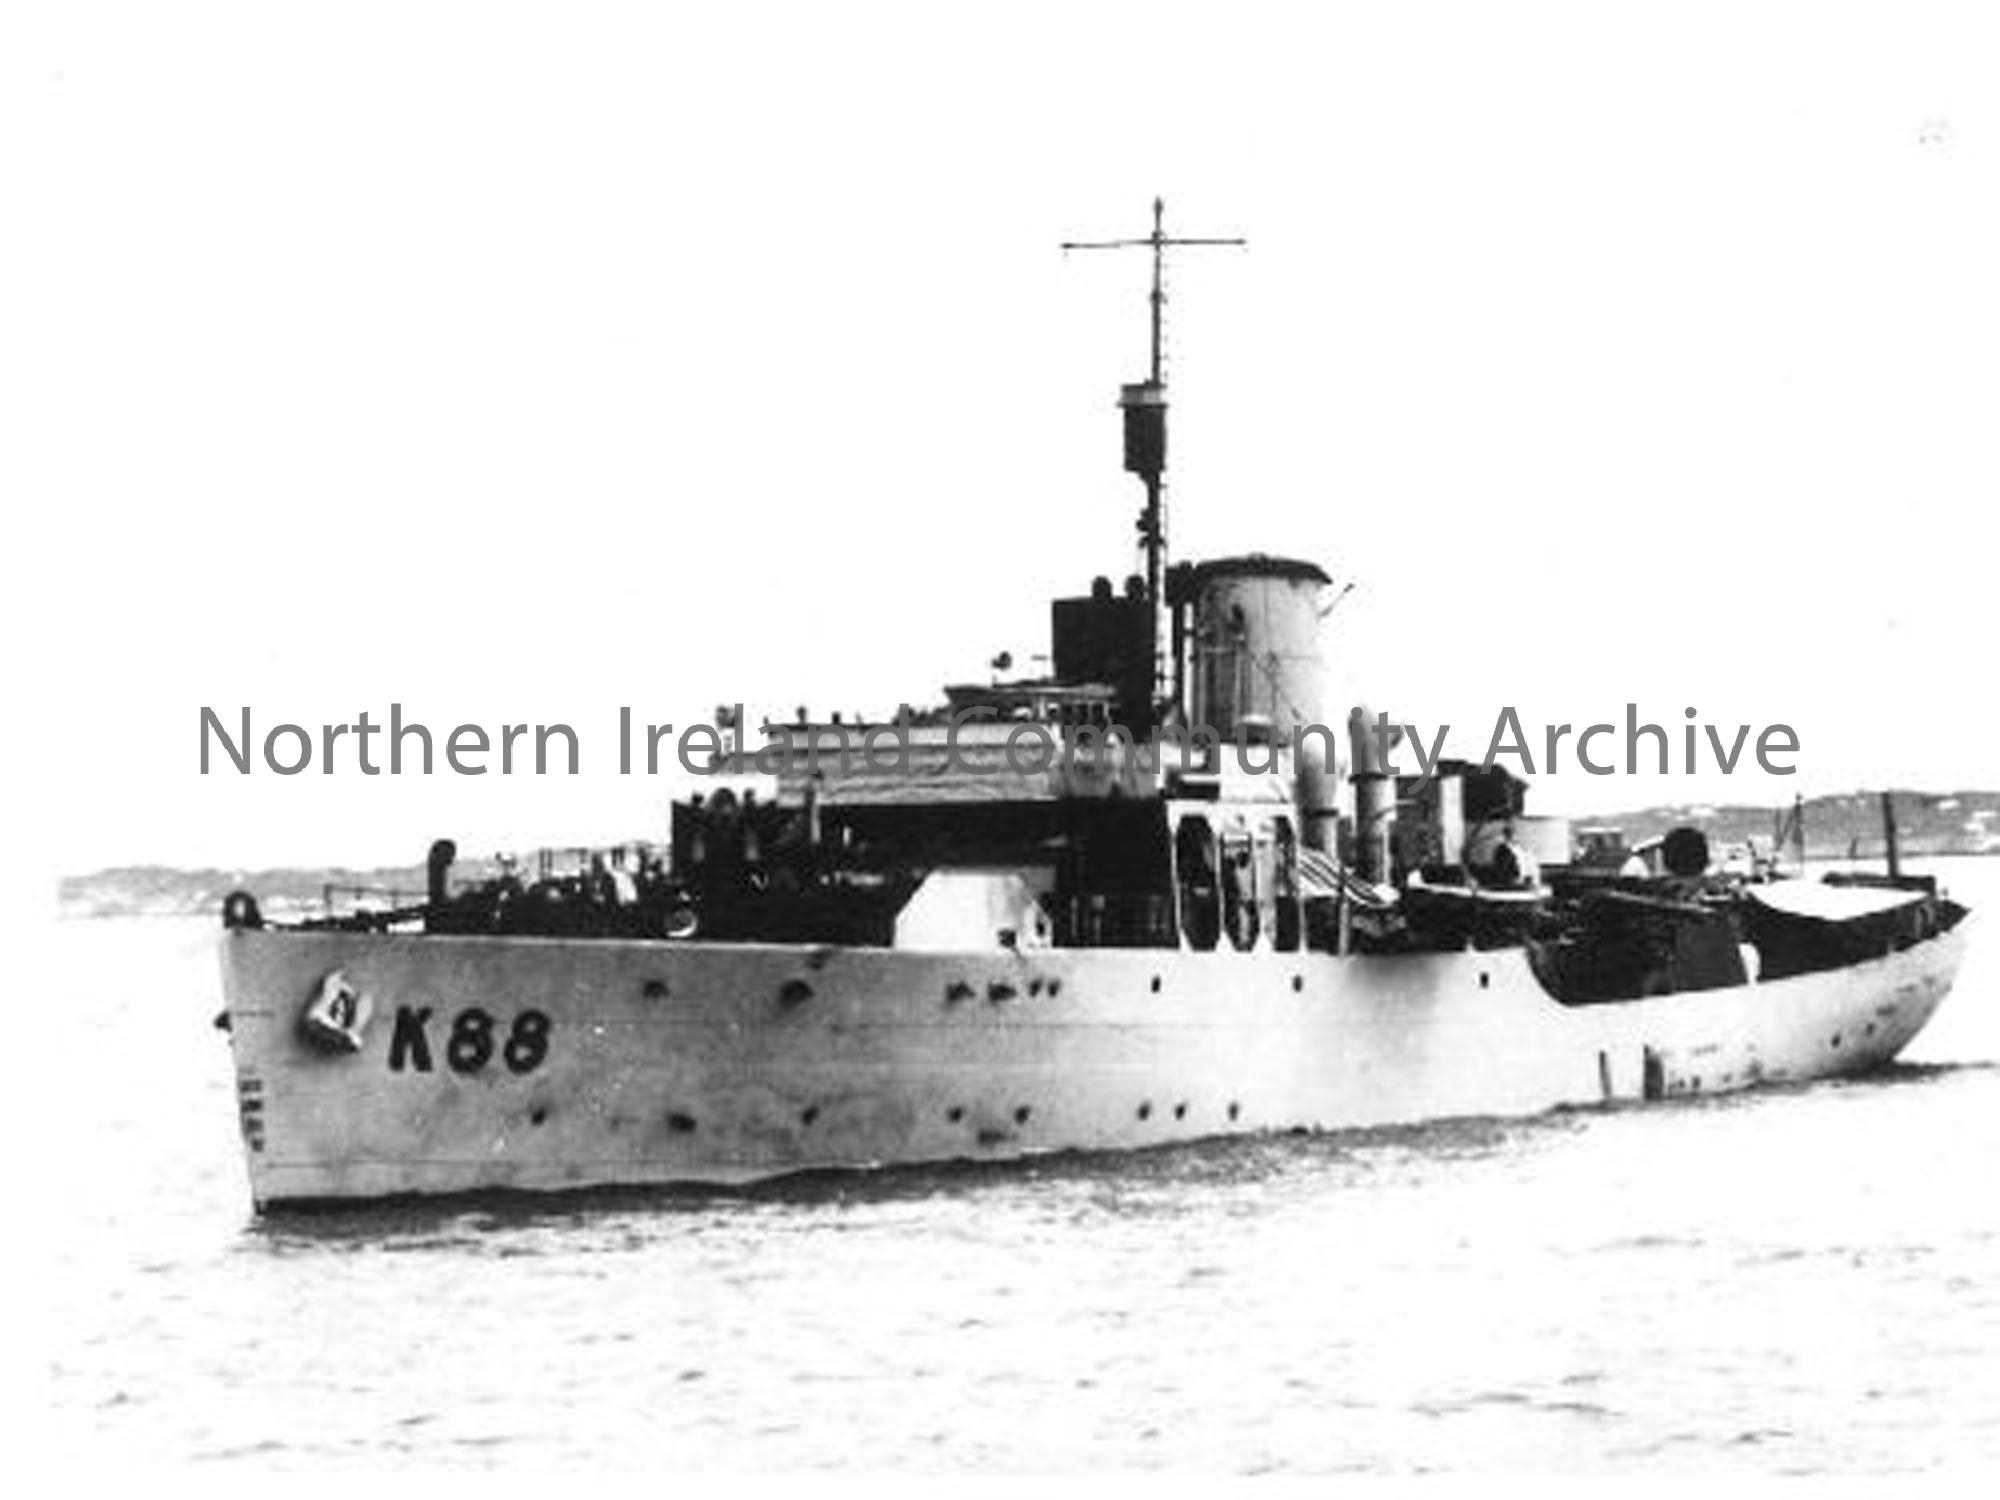 HMS Clarkia
K 88 
Ship number 1060
Launched: 7 Mar, 1940 
Commissioned: 22 Apr, 1940 
 (4377)